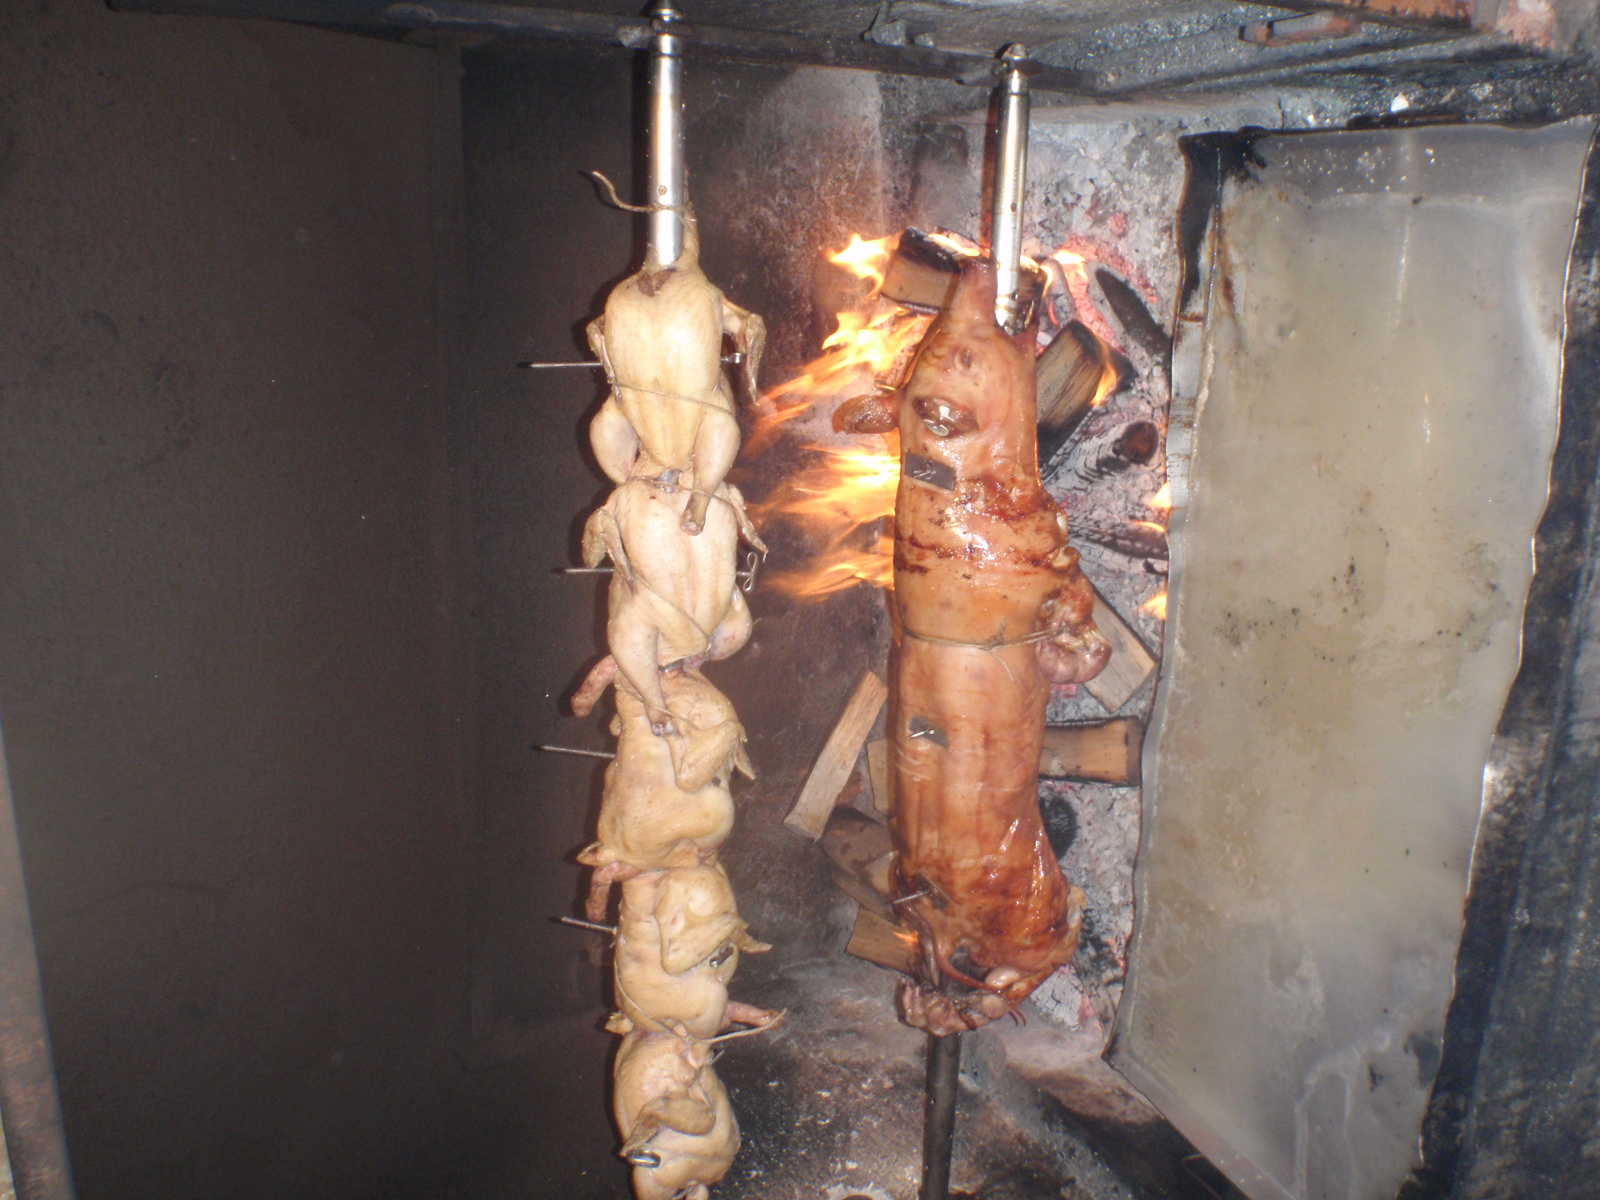 meats are being prepared for cooking in a kitchen